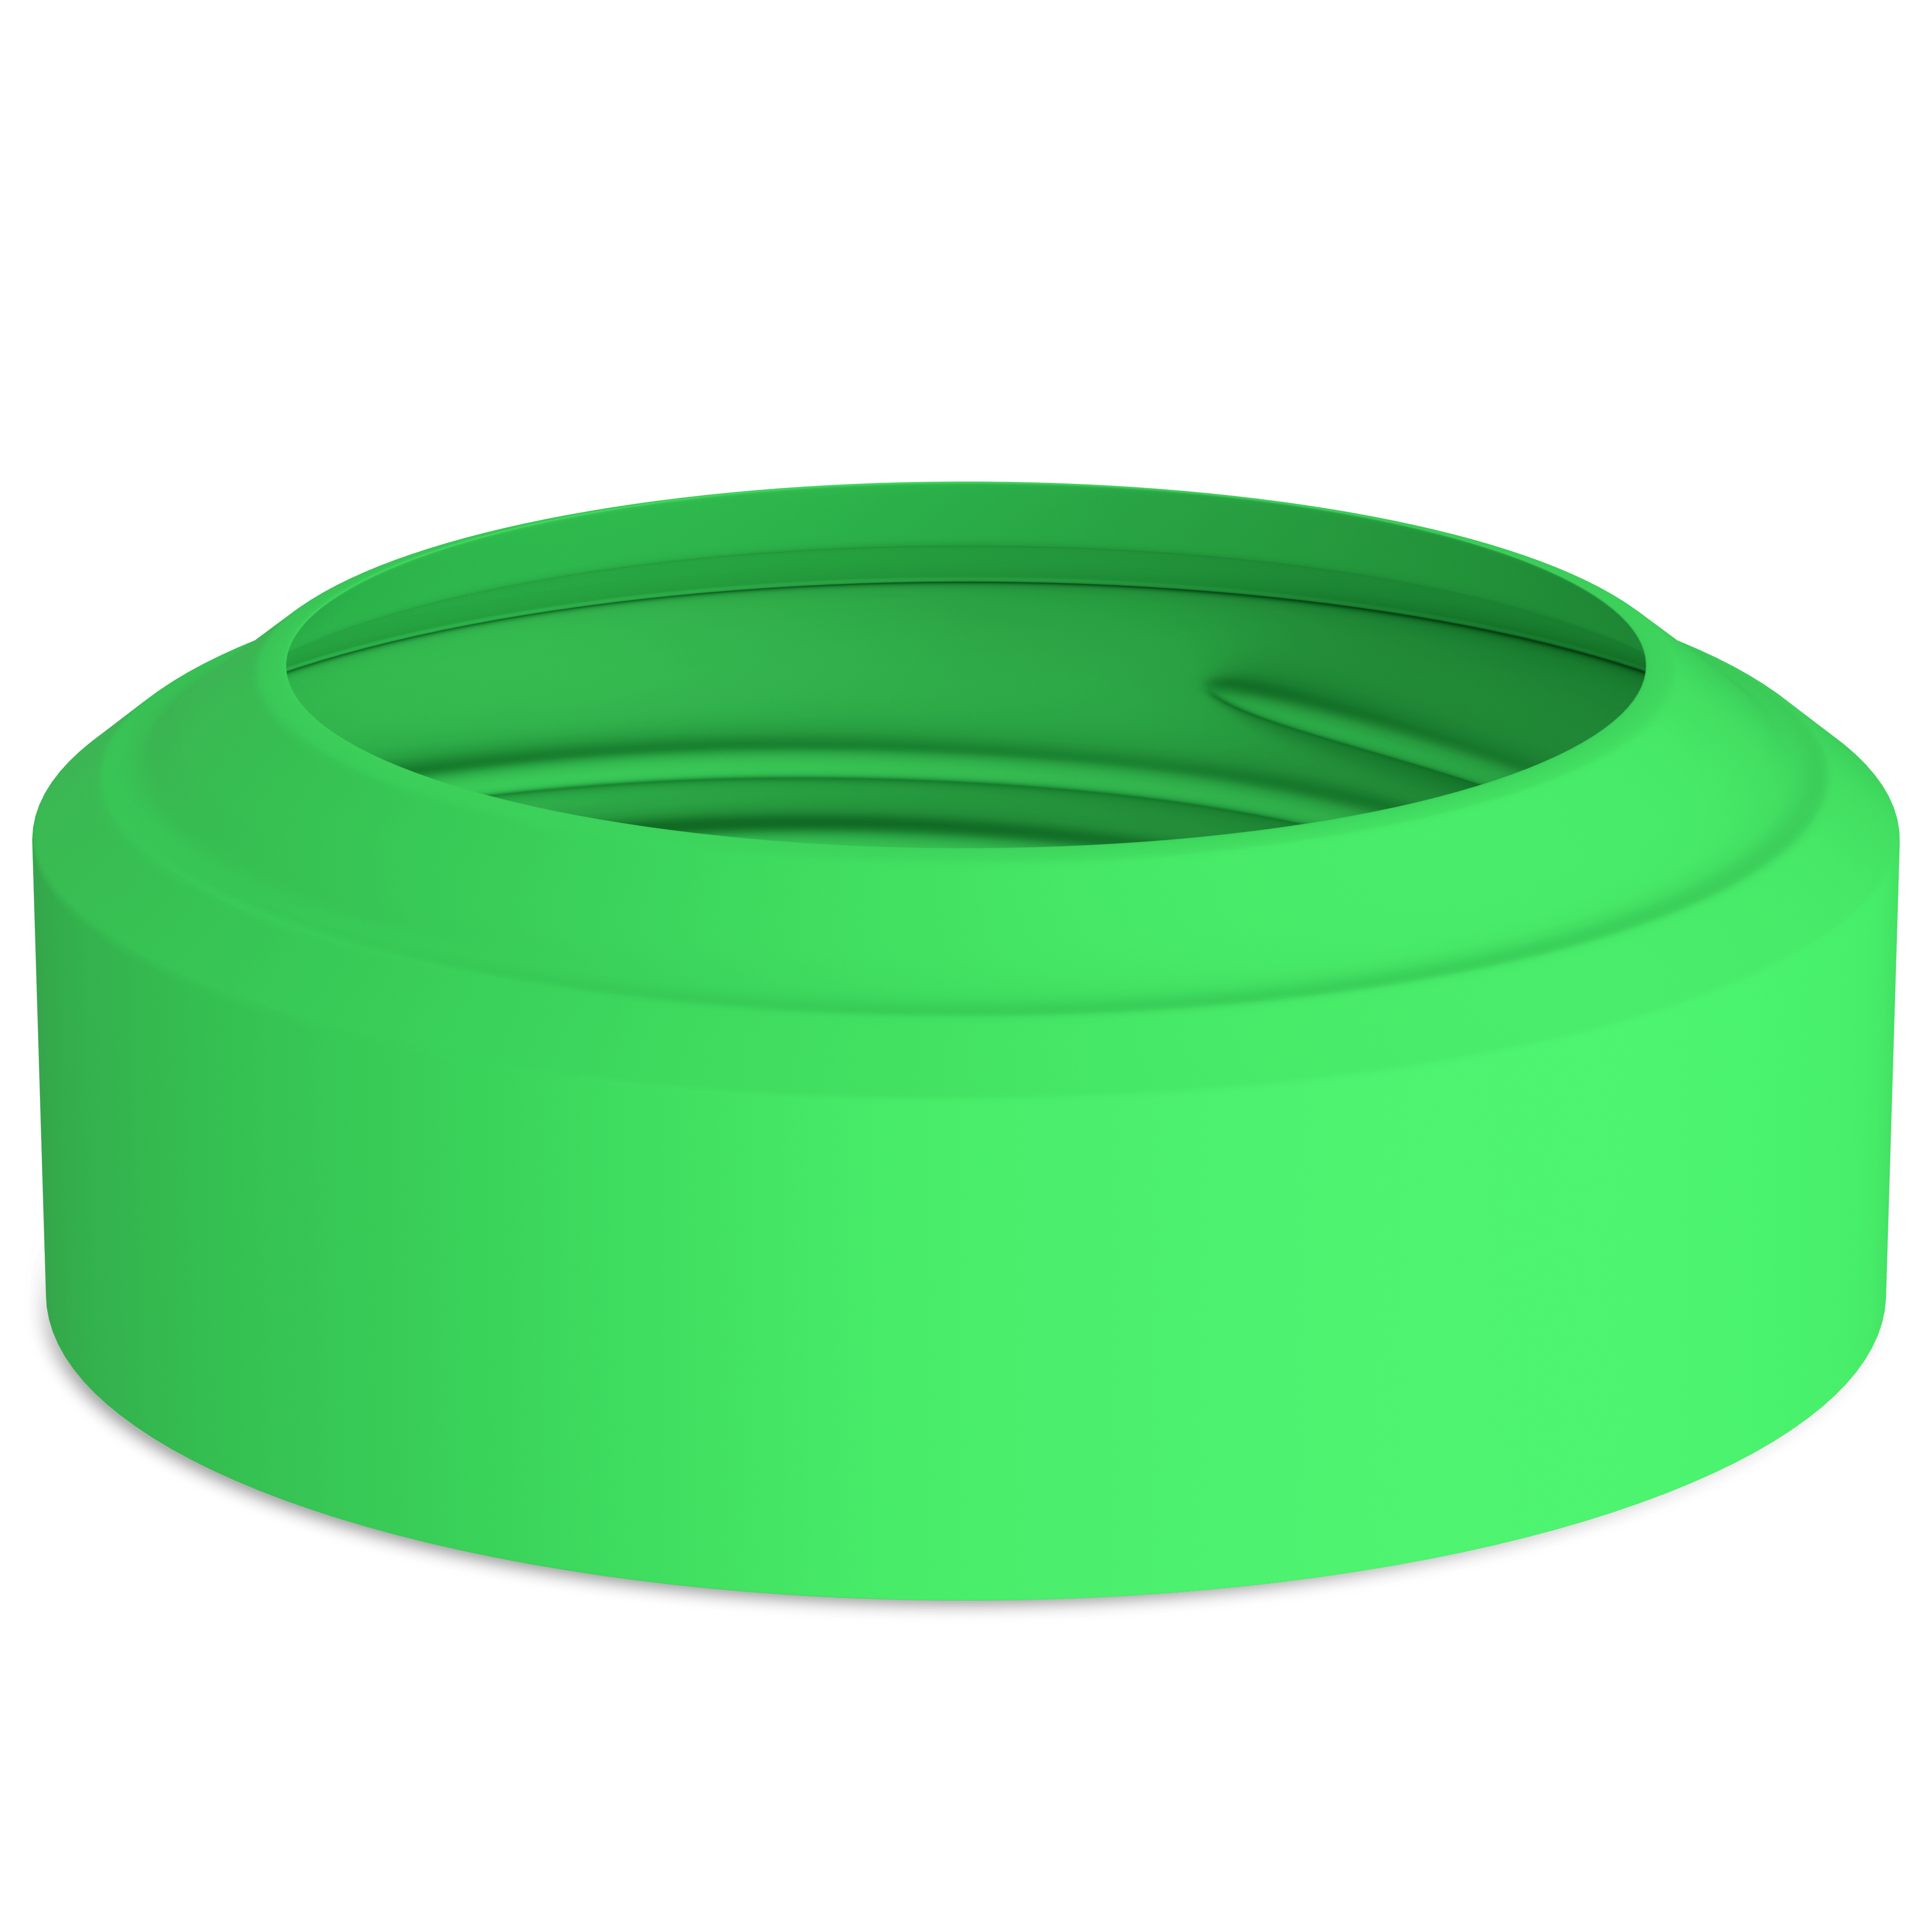 Frost Buddy Universal Buddy Replacement Lid